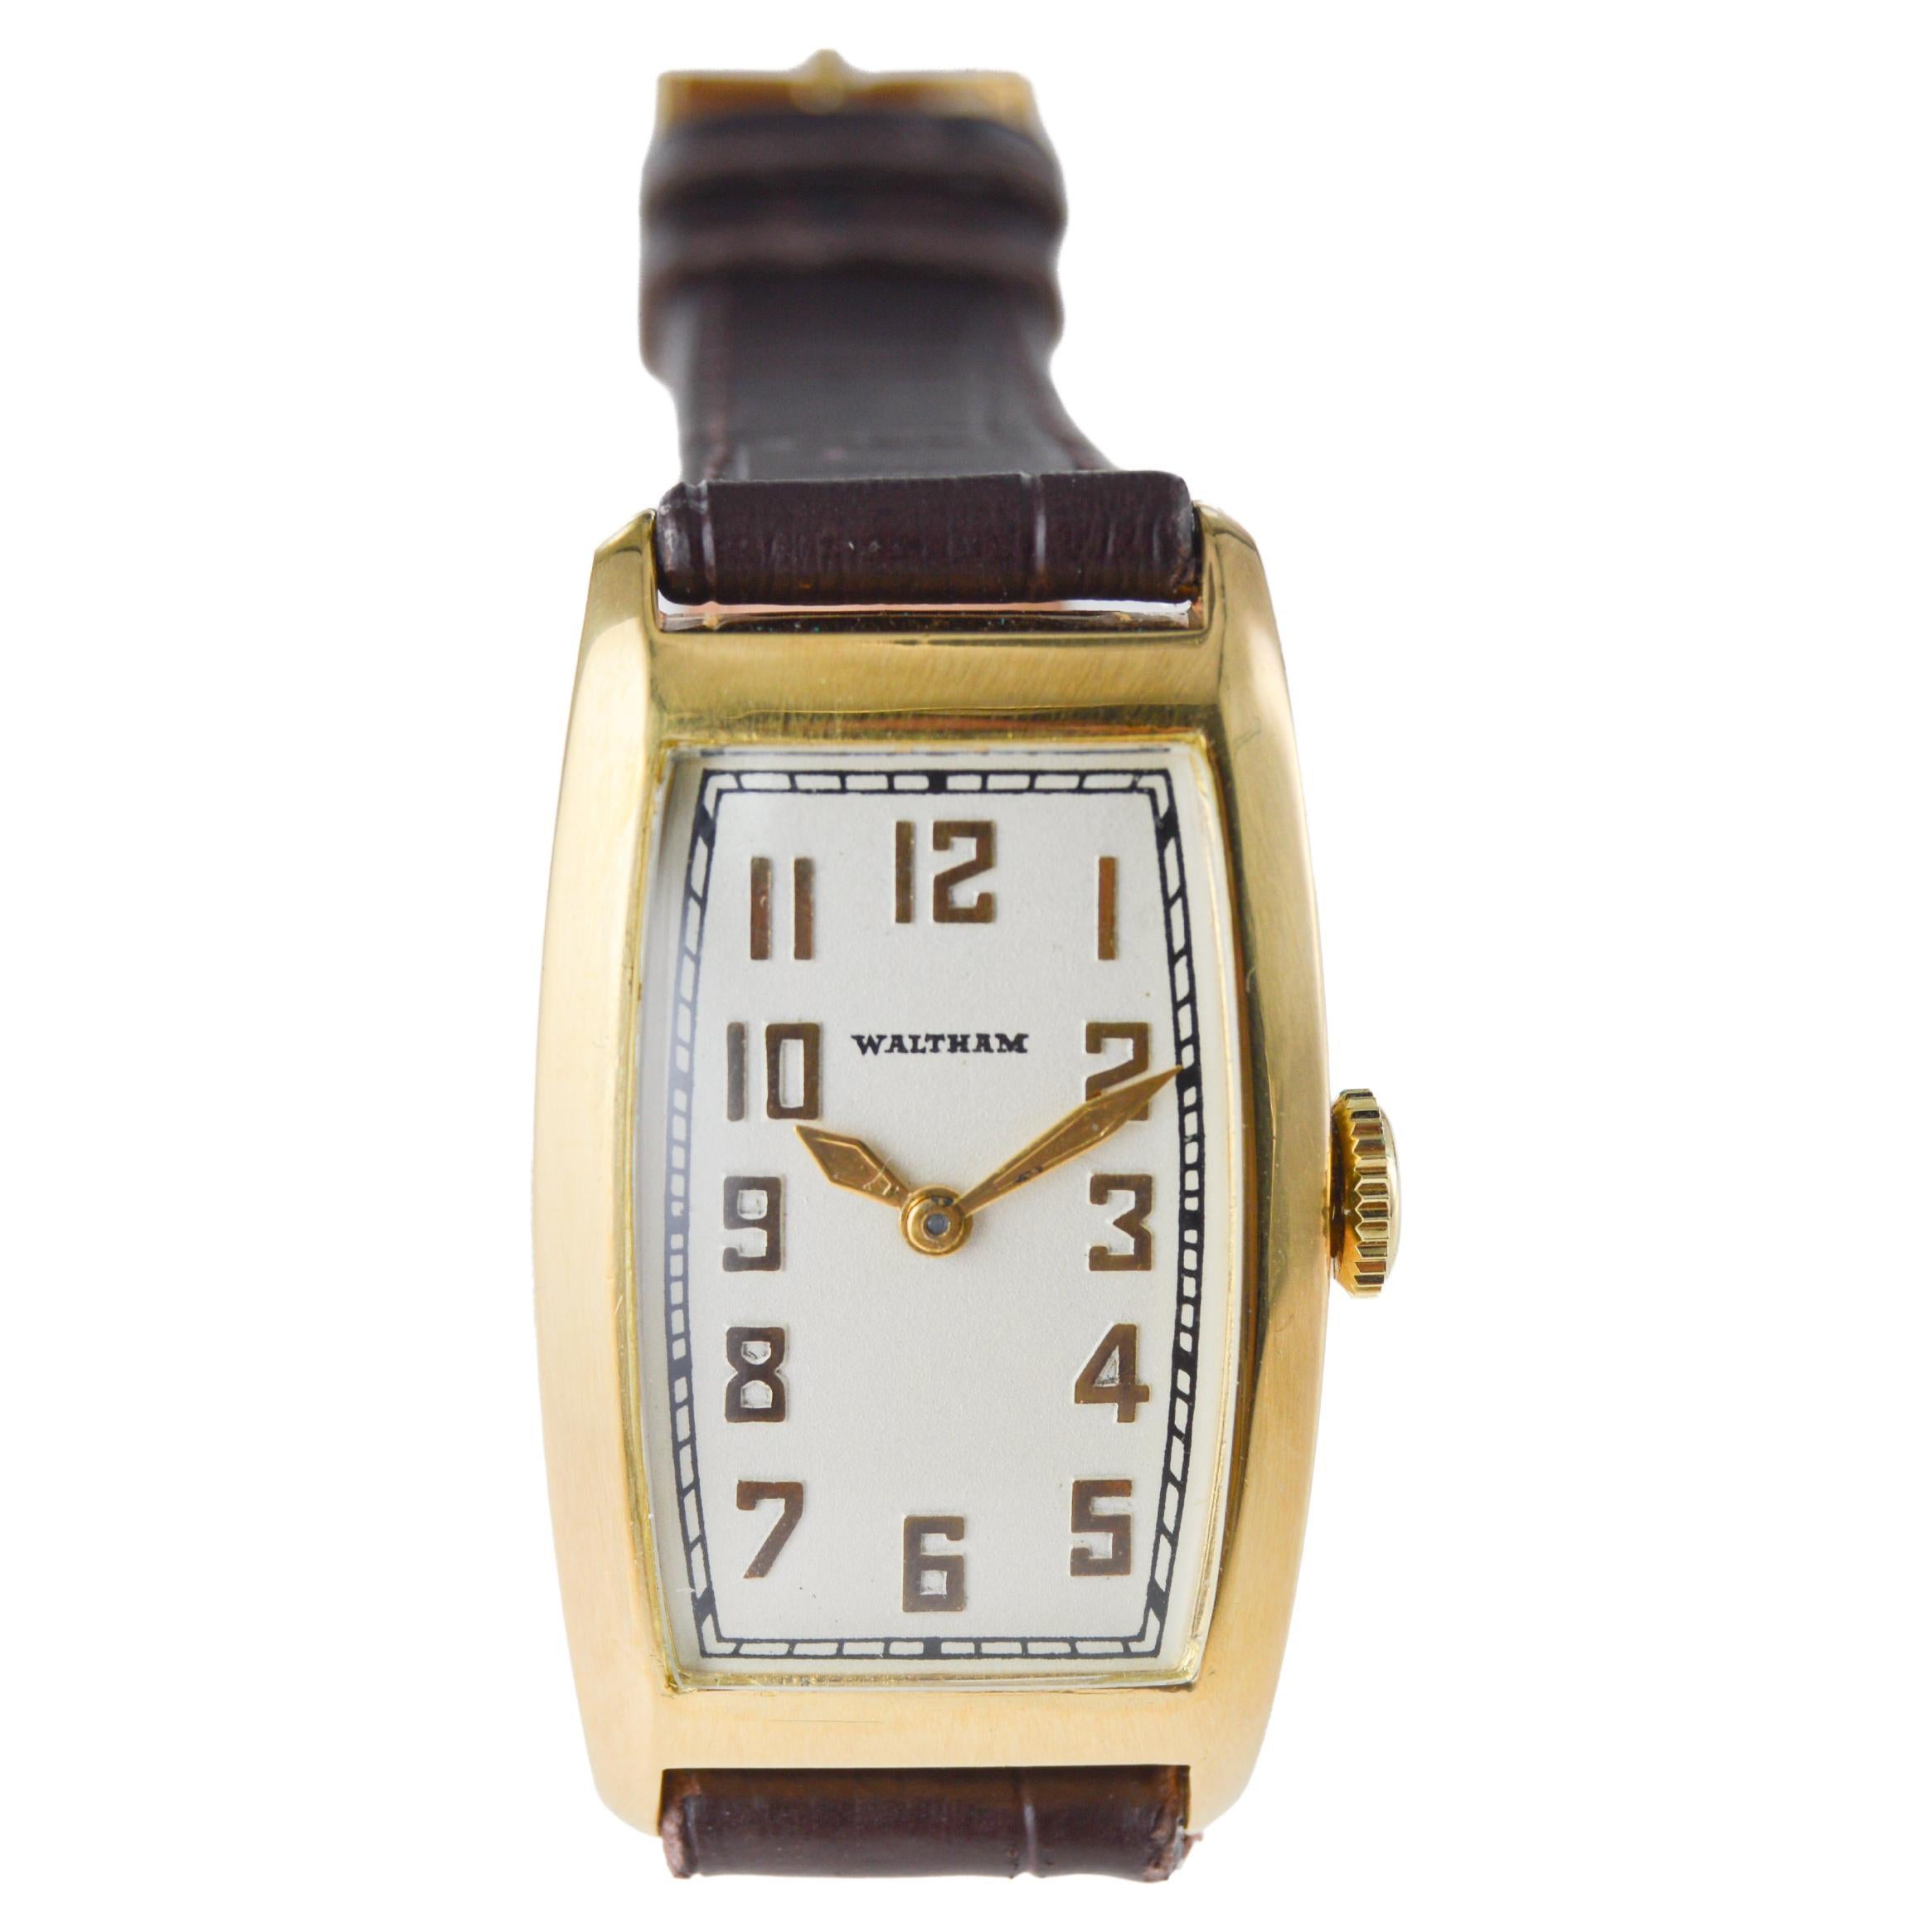 Waltham Gold Filled Art Deco Tonneau Watch with Flawless Original Dial From 1934 In Excellent Condition For Sale In Long Beach, CA